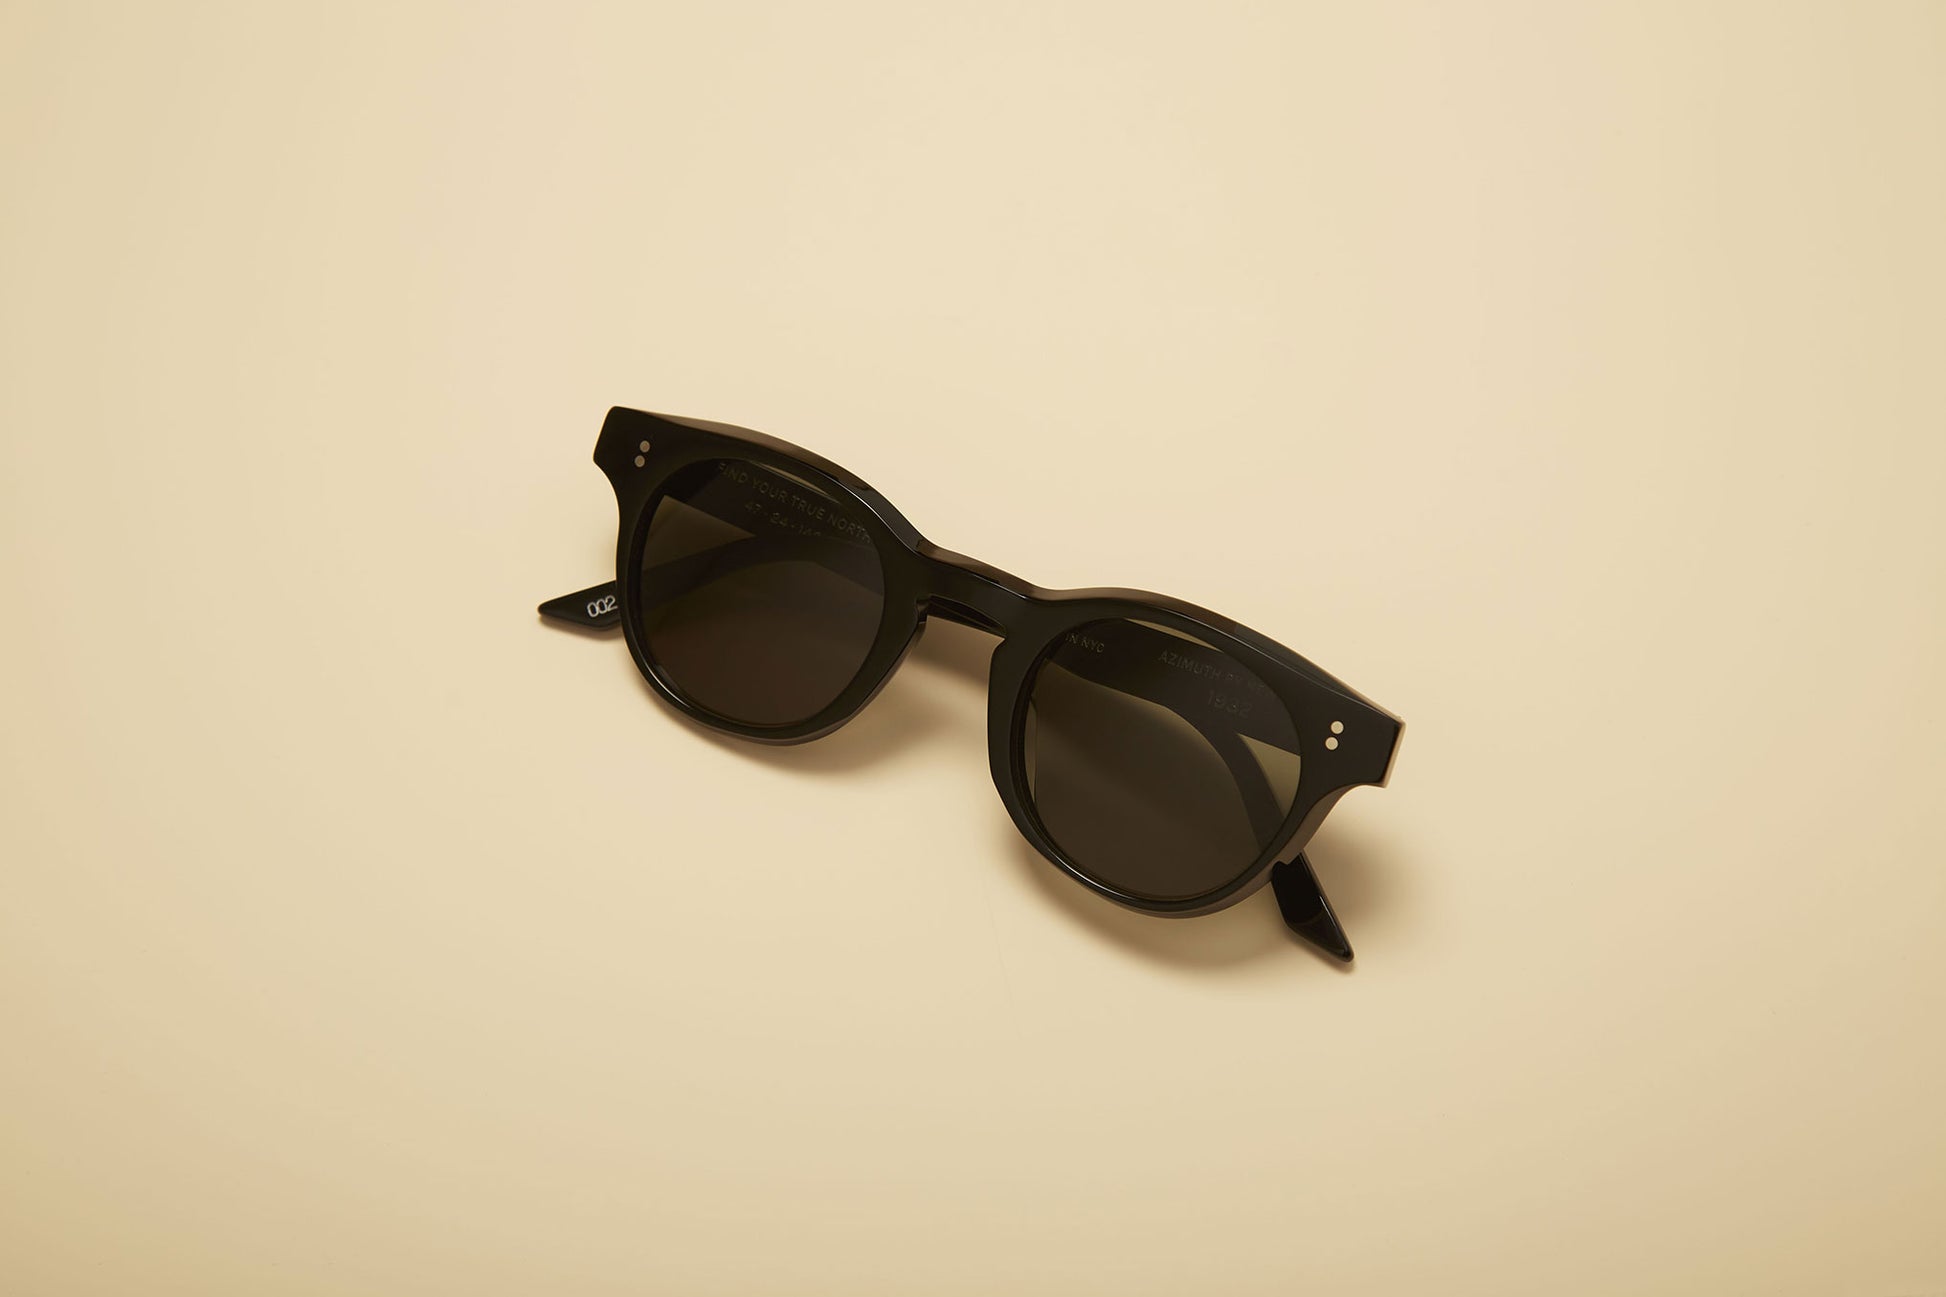 Black round sunglasses front view